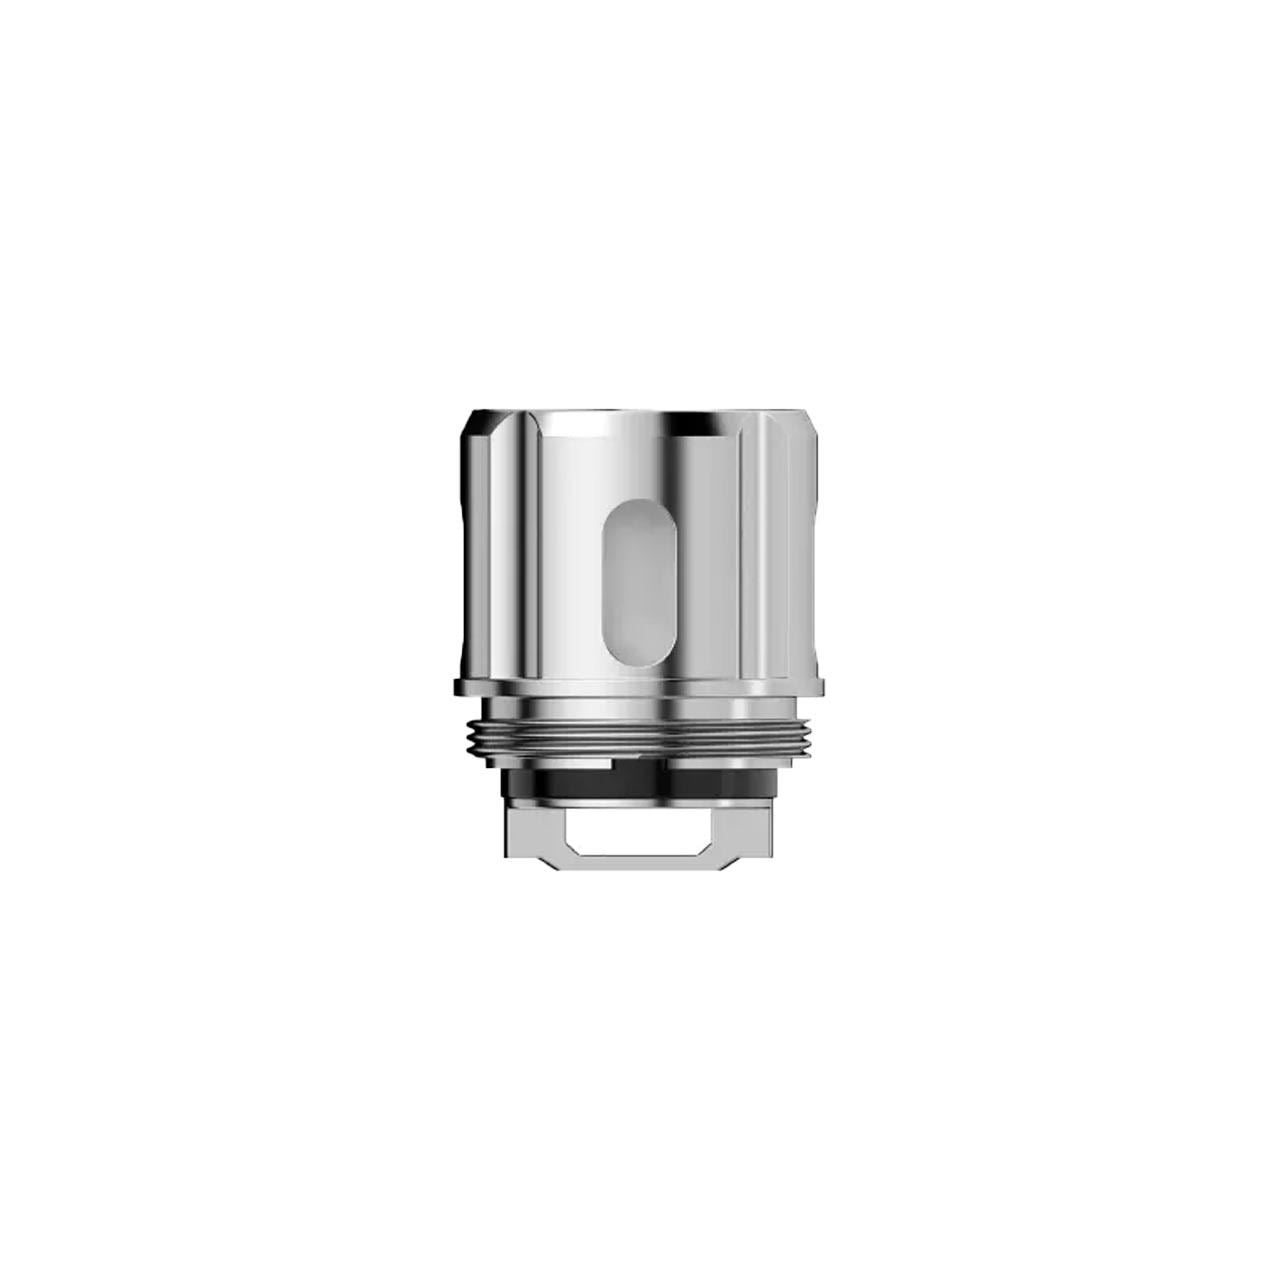 TFV 9 Replacement coils (Single Coil) coil SMOK 